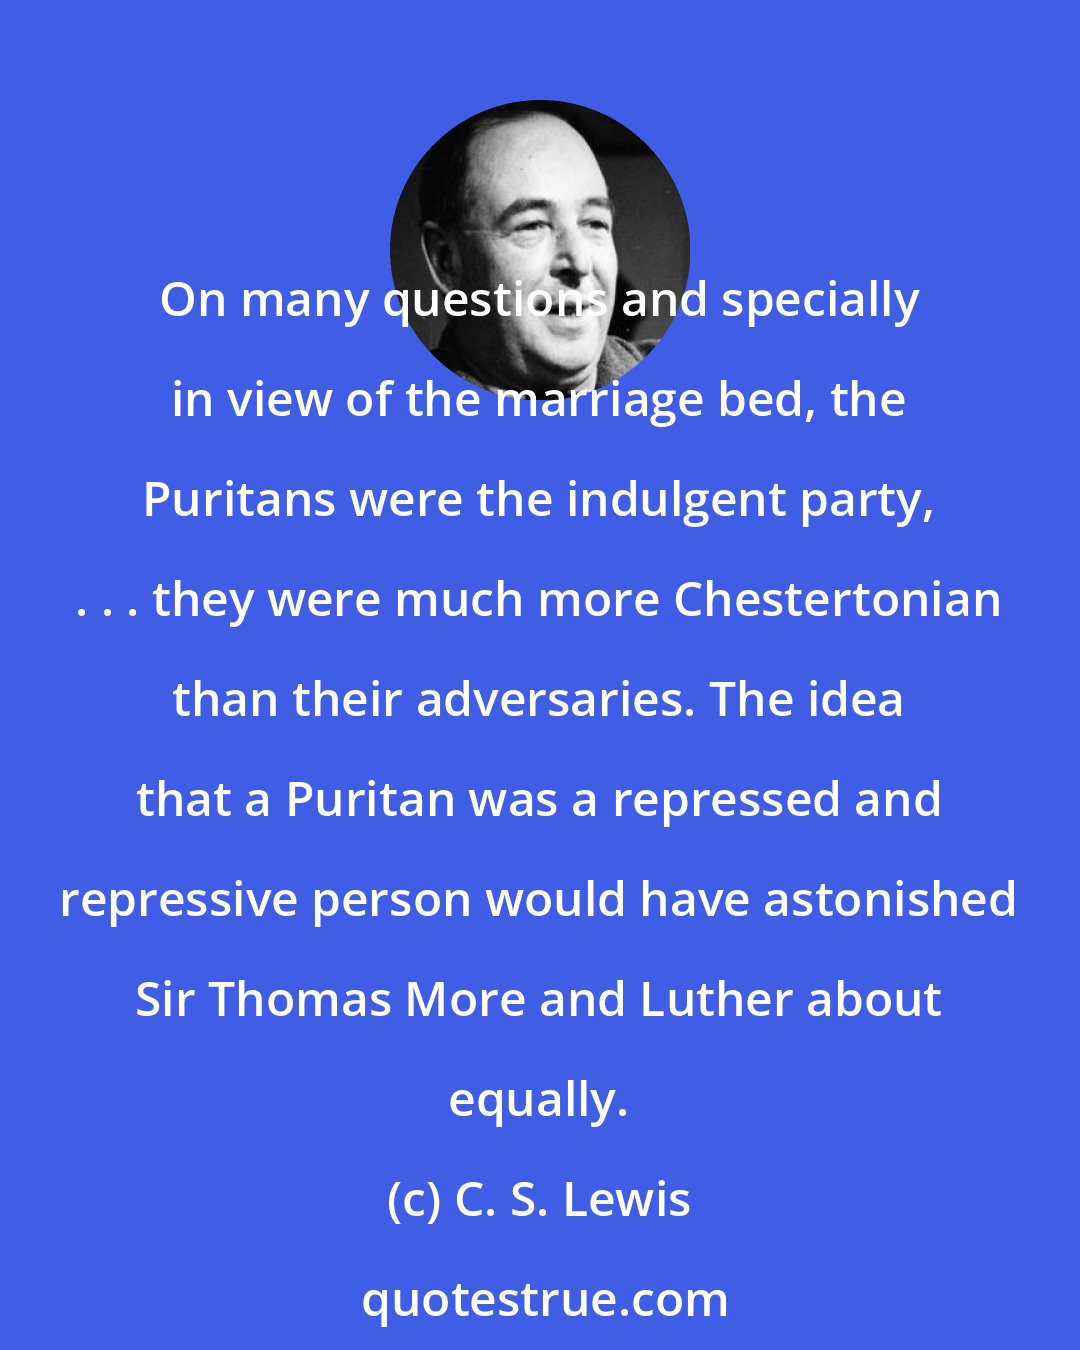 C. S. Lewis: On many questions and specially in view of the marriage bed, the Puritans were the indulgent party, . . . they were much more Chestertonian than their adversaries. The idea that a Puritan was a repressed and repressive person would have astonished Sir Thomas More and Luther about equally.